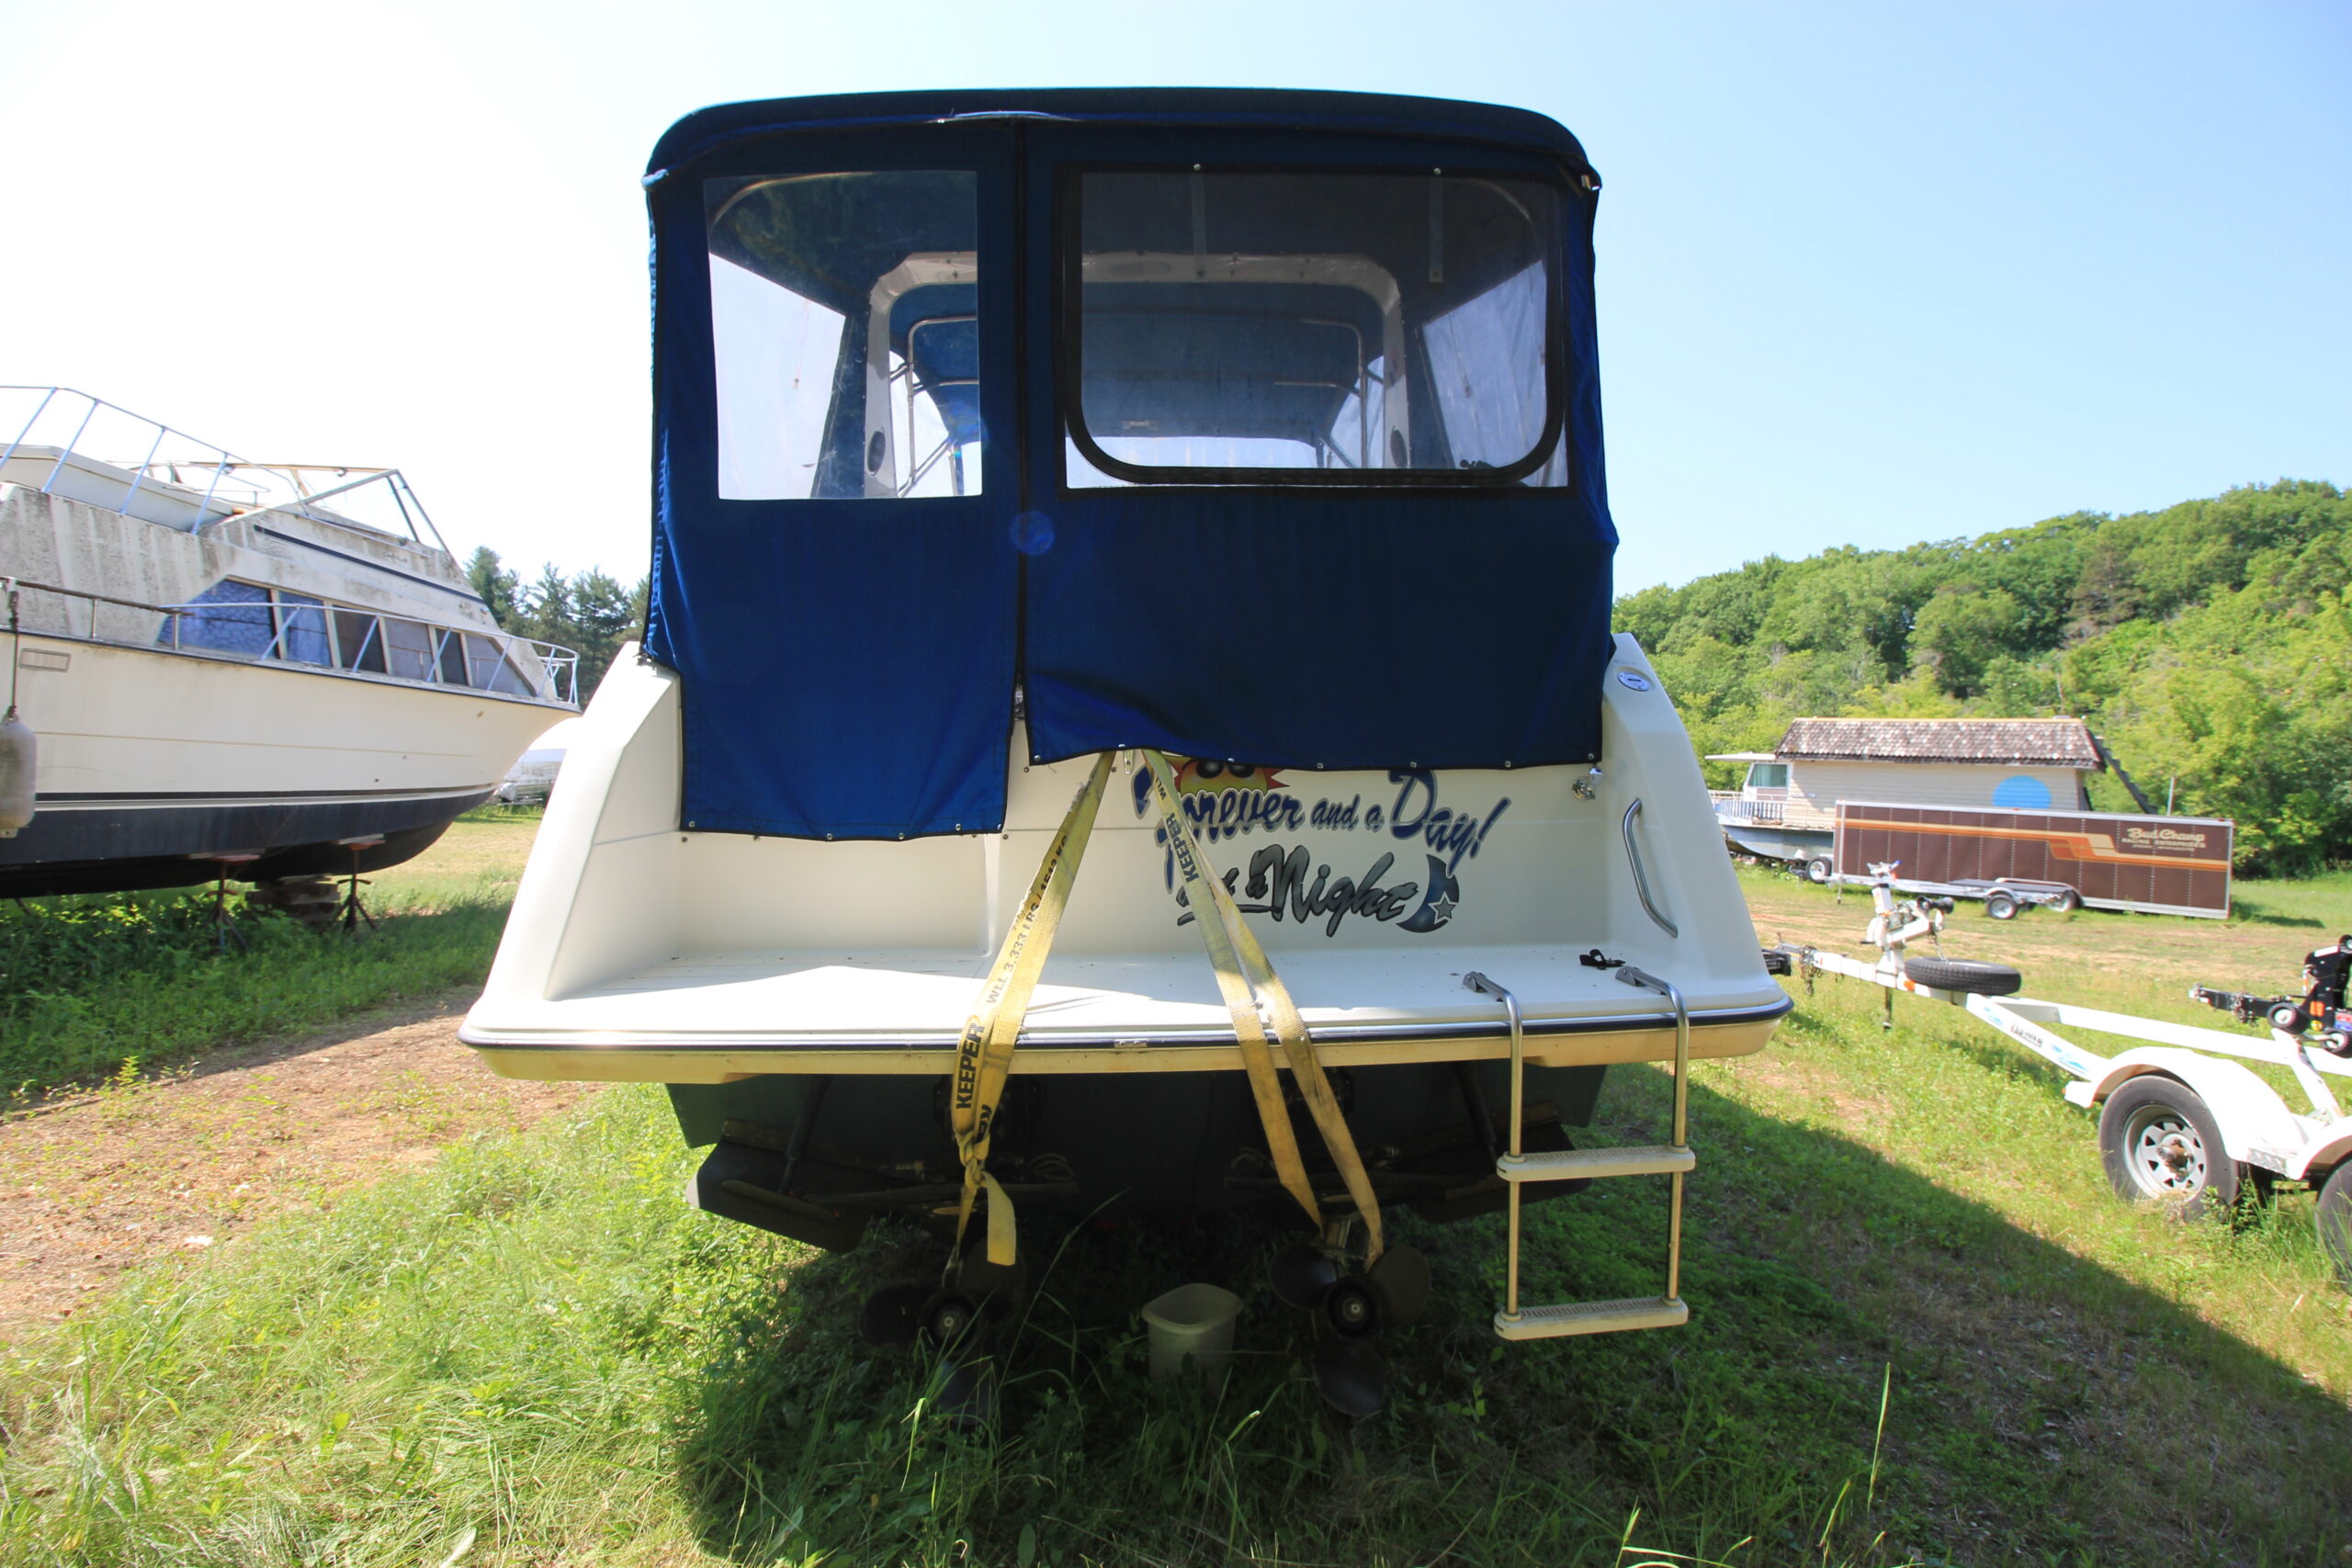 1994 Bayliner 3055 Ciera Sunbridge - Anchors Aweigh Boat Sales - Used Boats For Sale In Minnesota (5)